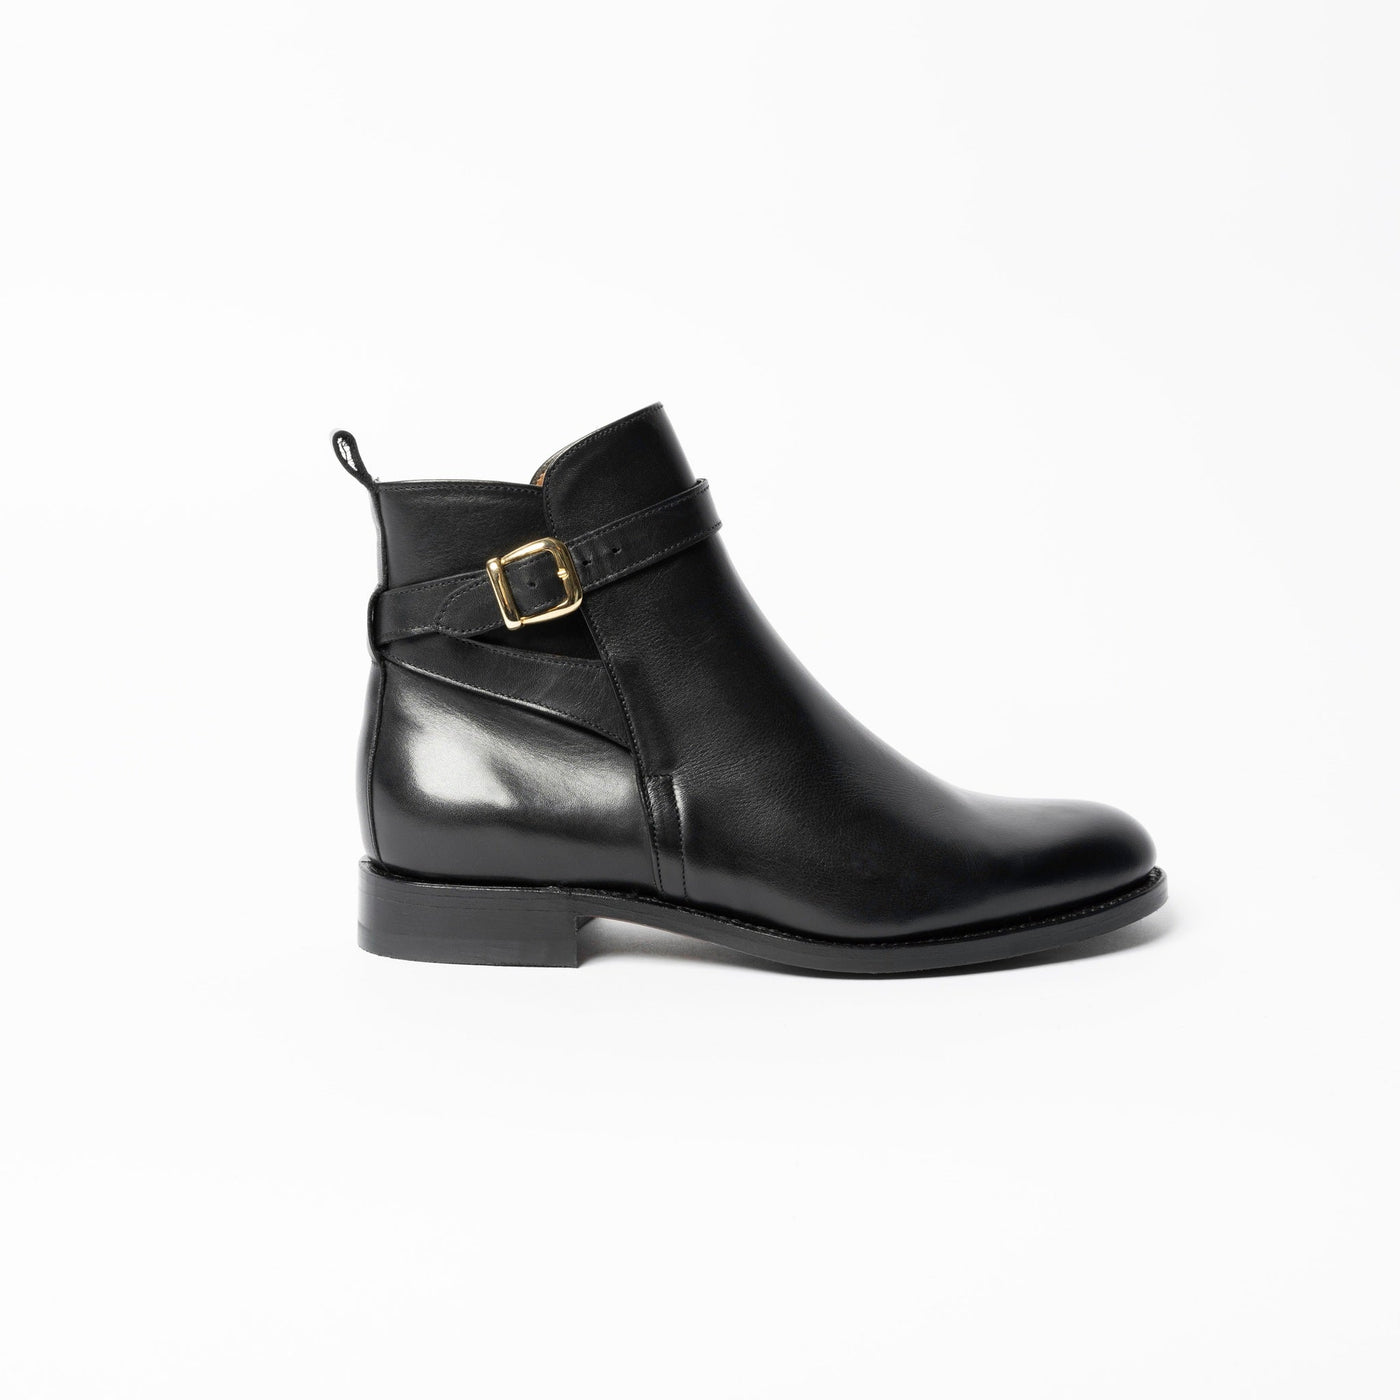 Goodyear Welt Short Ankle Boots in black leather.